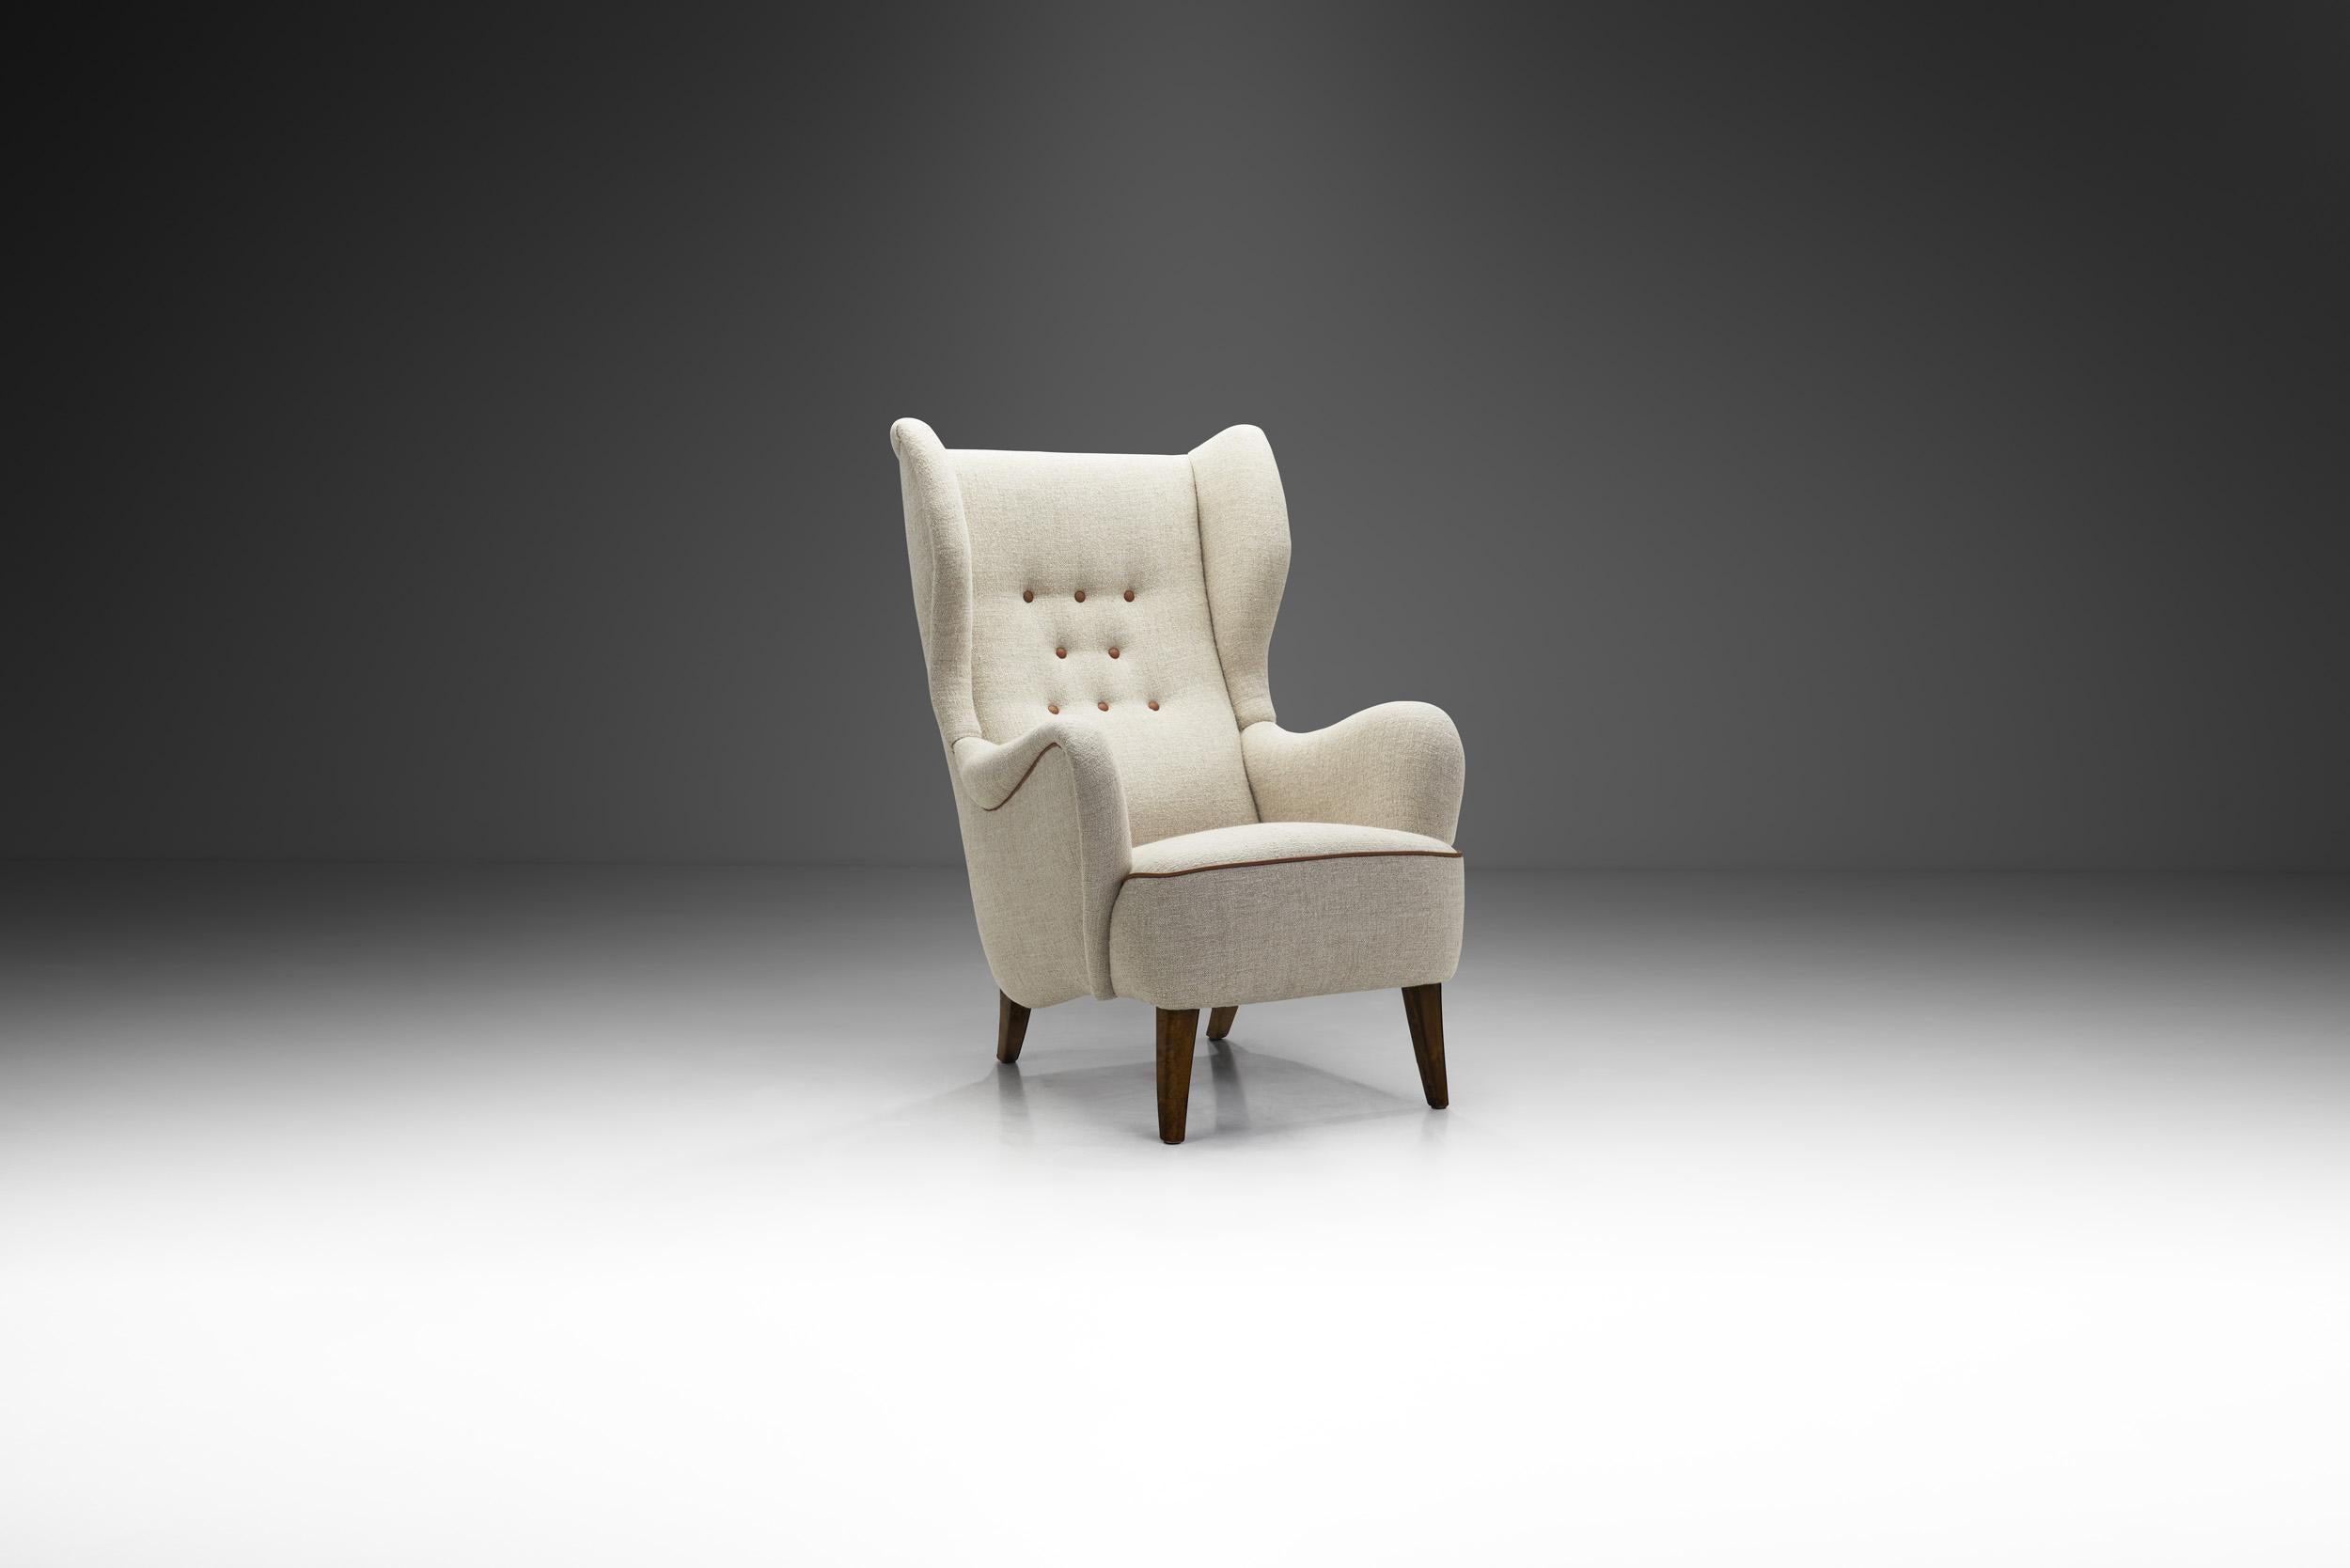 Simplicity, functionality, and elegance - these are the basic aspects of Danish design and accordingly, of this sophisticated wing-back chair. This unique model is a great representation of the quality and craftsmanship of Danish master